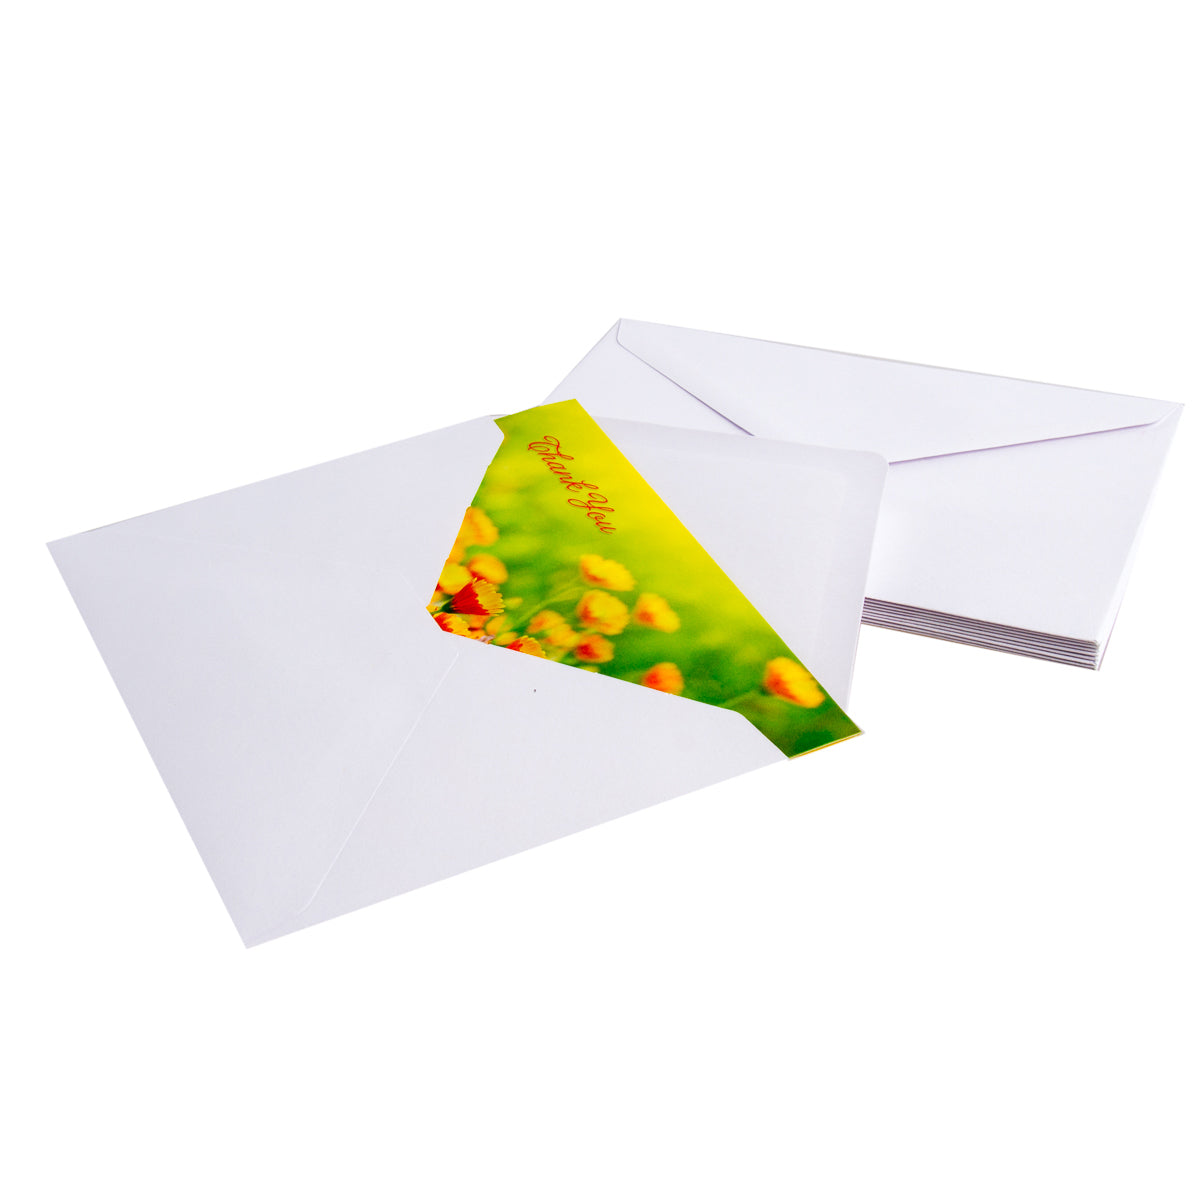 10pk Blank Thank You Cards & Envelopes by Special Thoughts